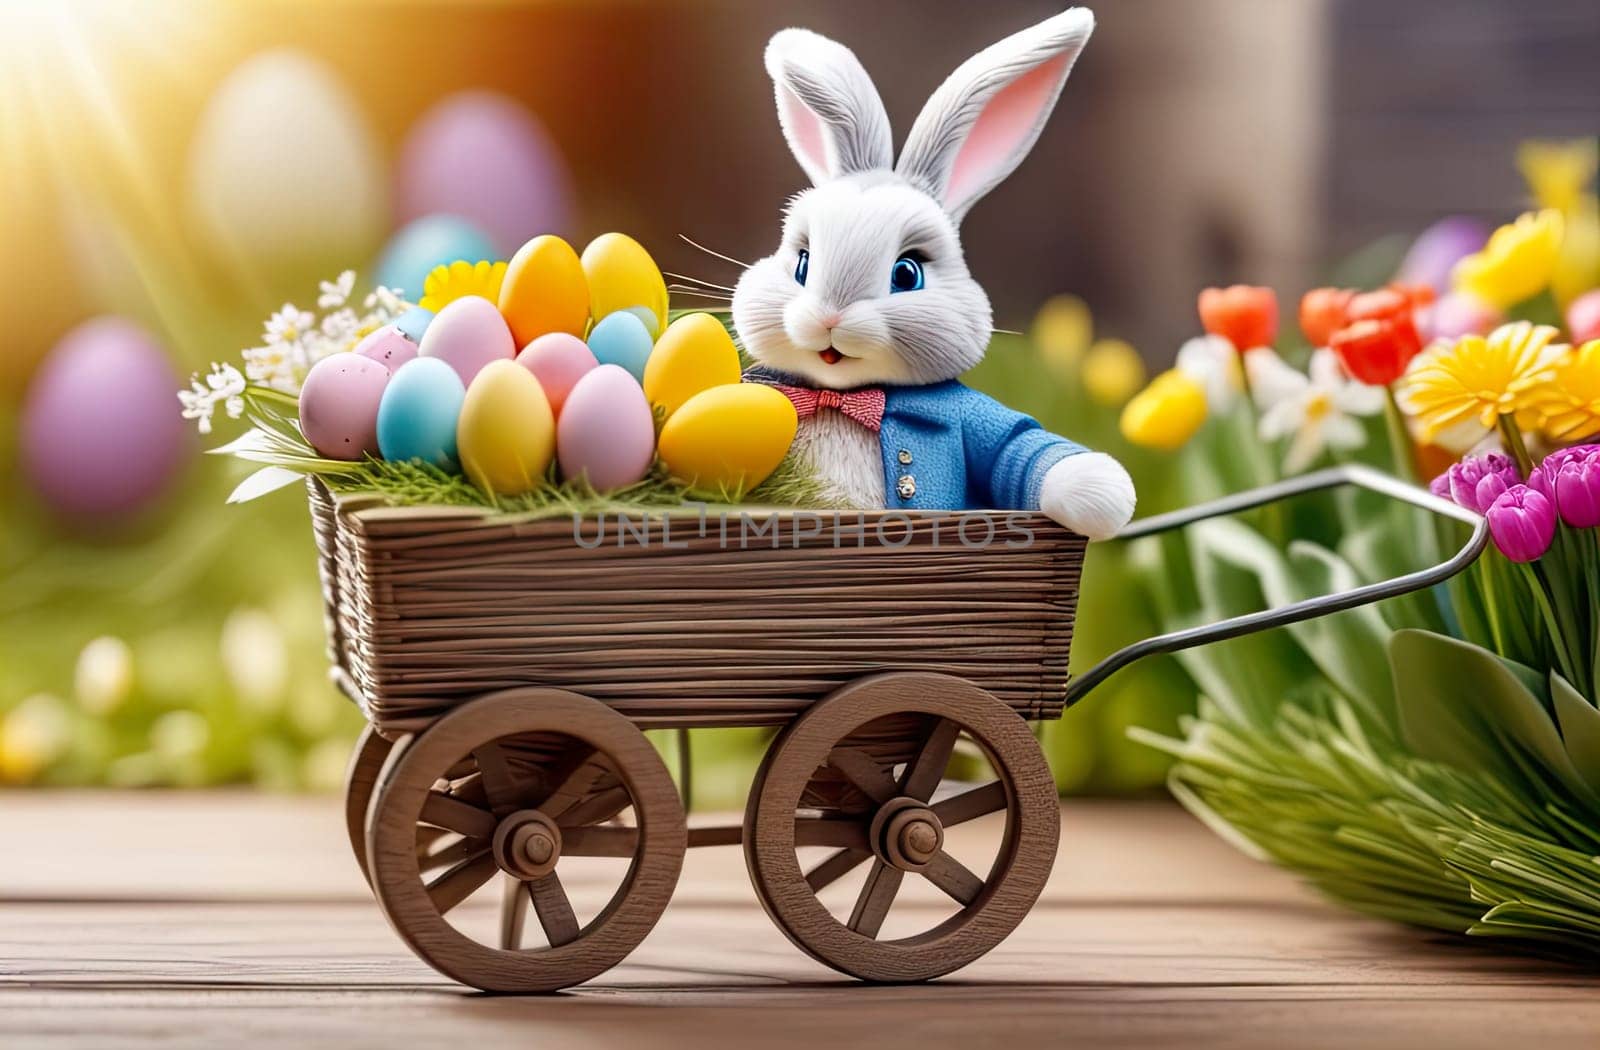 Easter symbol concept. Cute white bunny sitting in a tiny cart full of Easter eggs and flowers, card